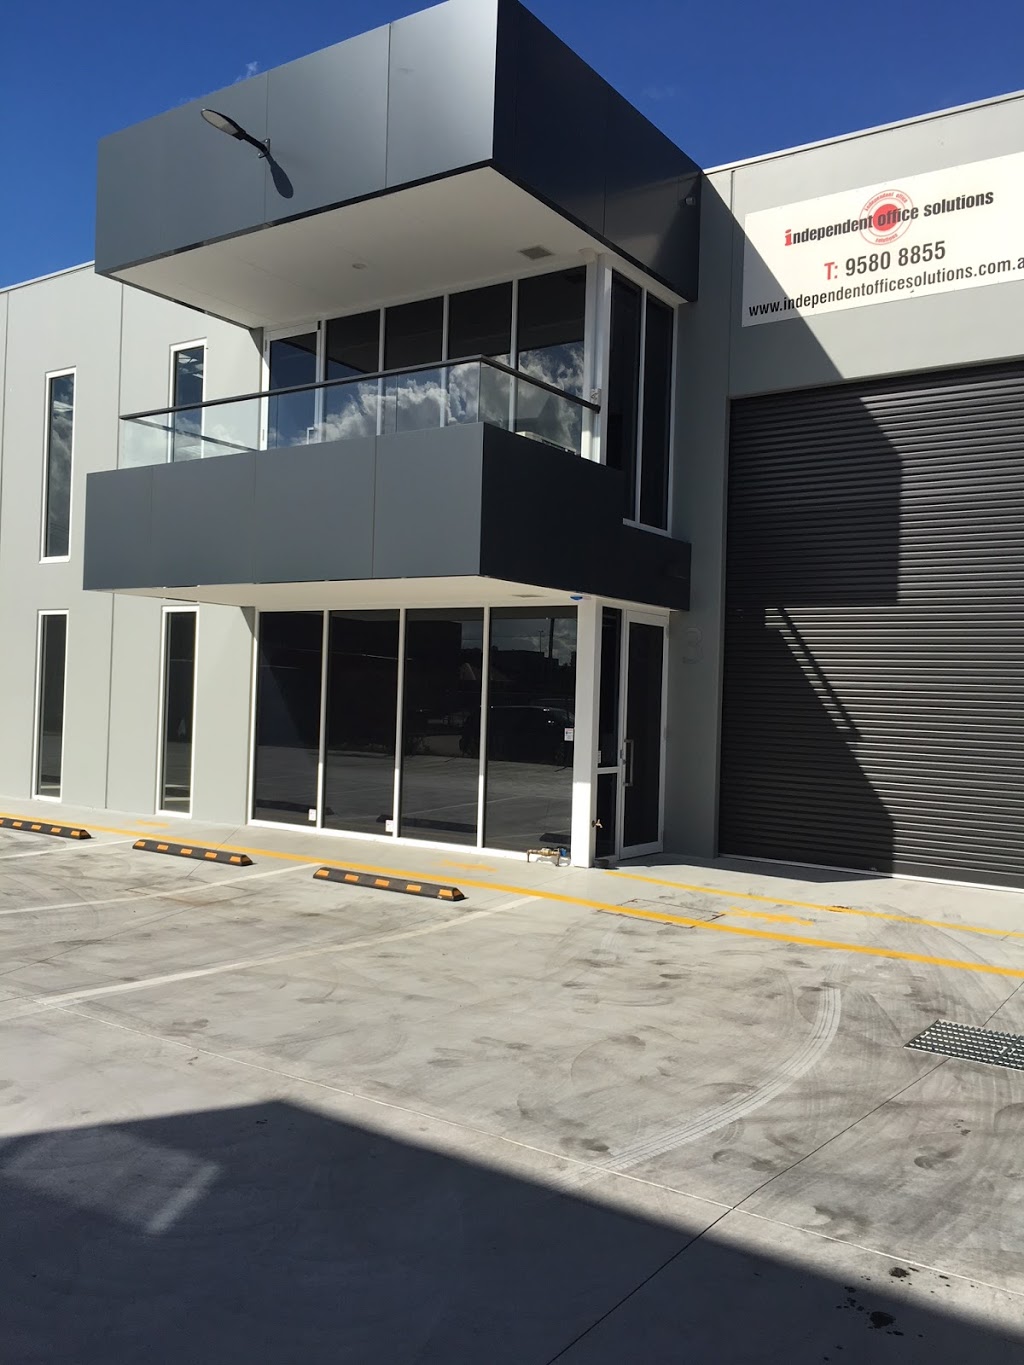 Independent Office Solutions Pty Ltd | furniture store | 3/56 Bond St W, Mordialloc VIC 3195, Australia | 0395808855 OR +61 3 9580 8855